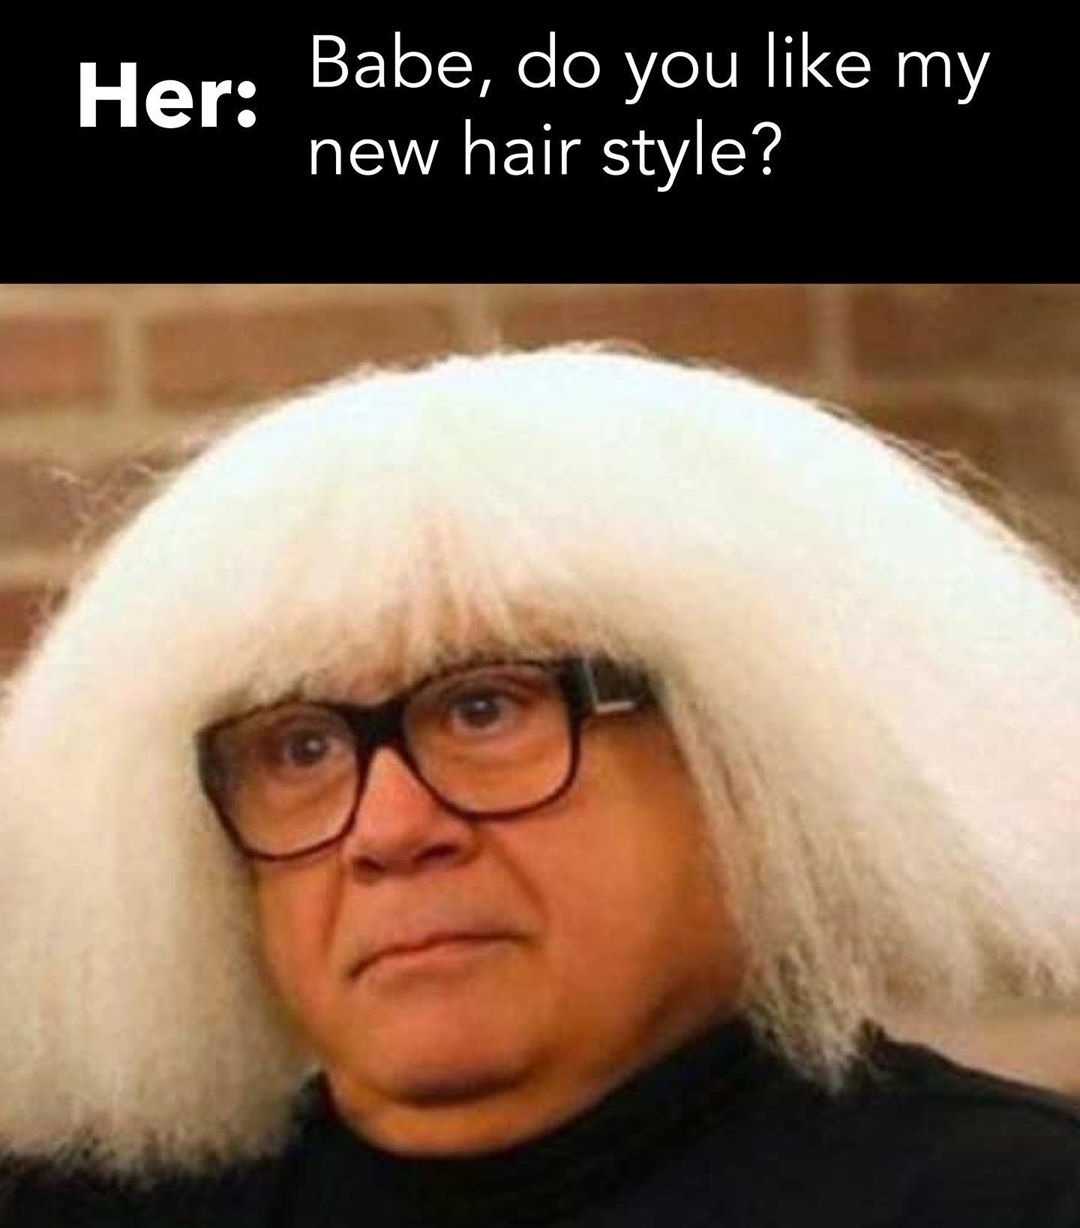 danny devito - Her Babe, do you my new hair style?